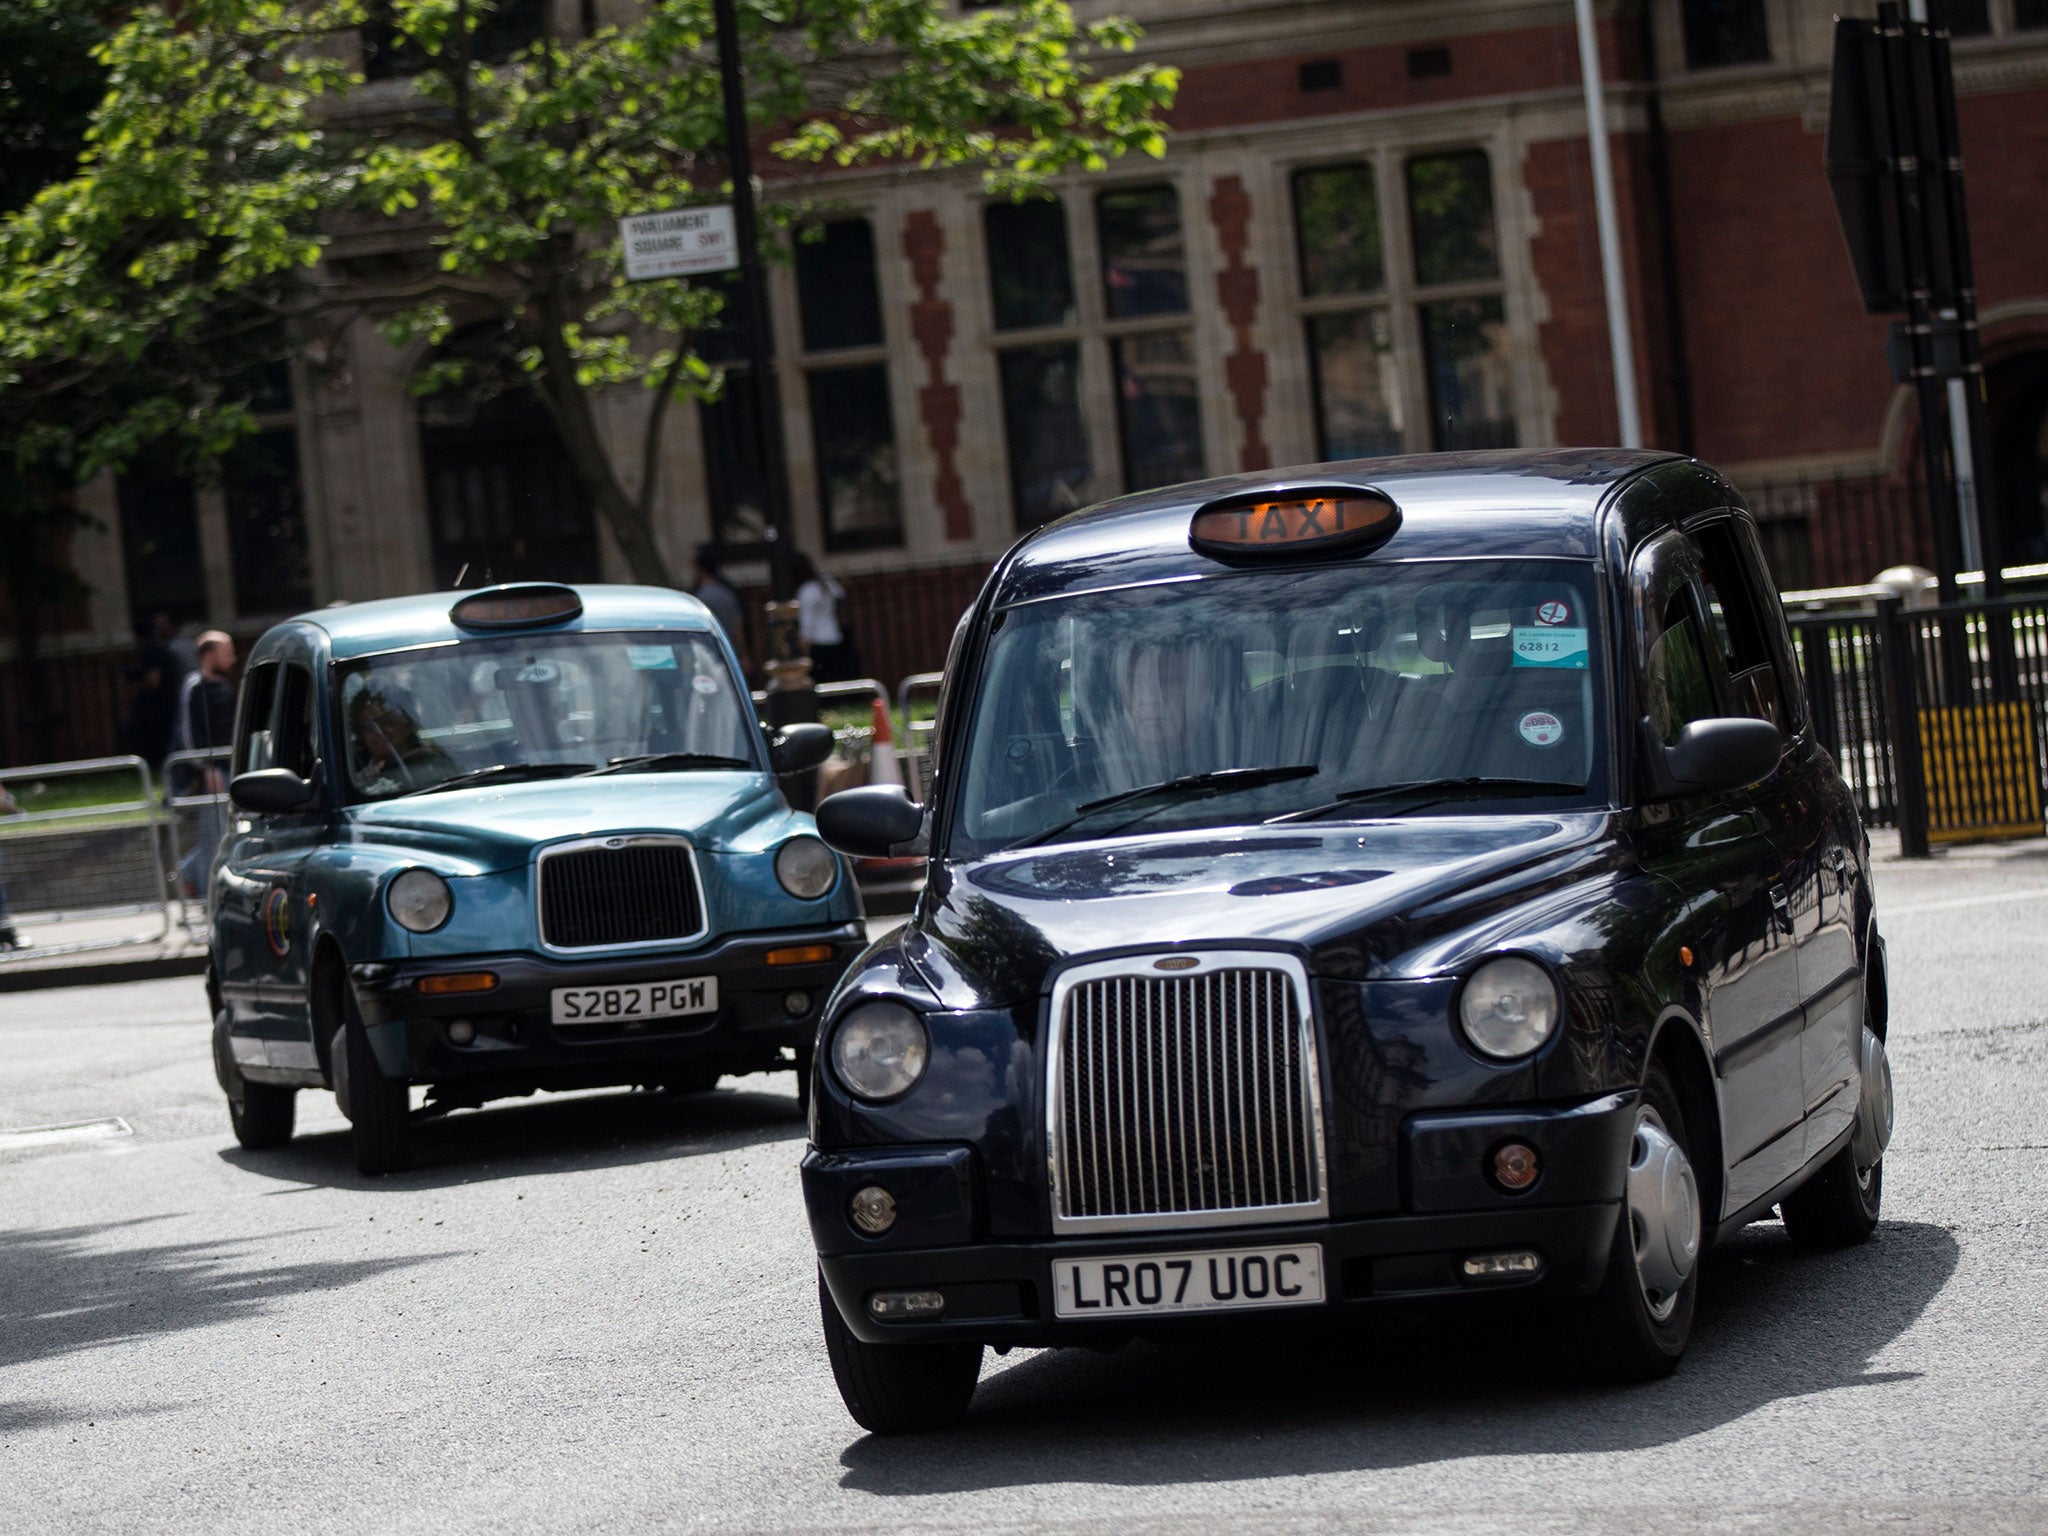 Taxis drive on the streets of Westminster on June 2, 2014 in London, England. The controversial mobile application 'Uber', which allows users to hail private-hire cars from any location, is opposed by established taxi drivers and currently serves more tha